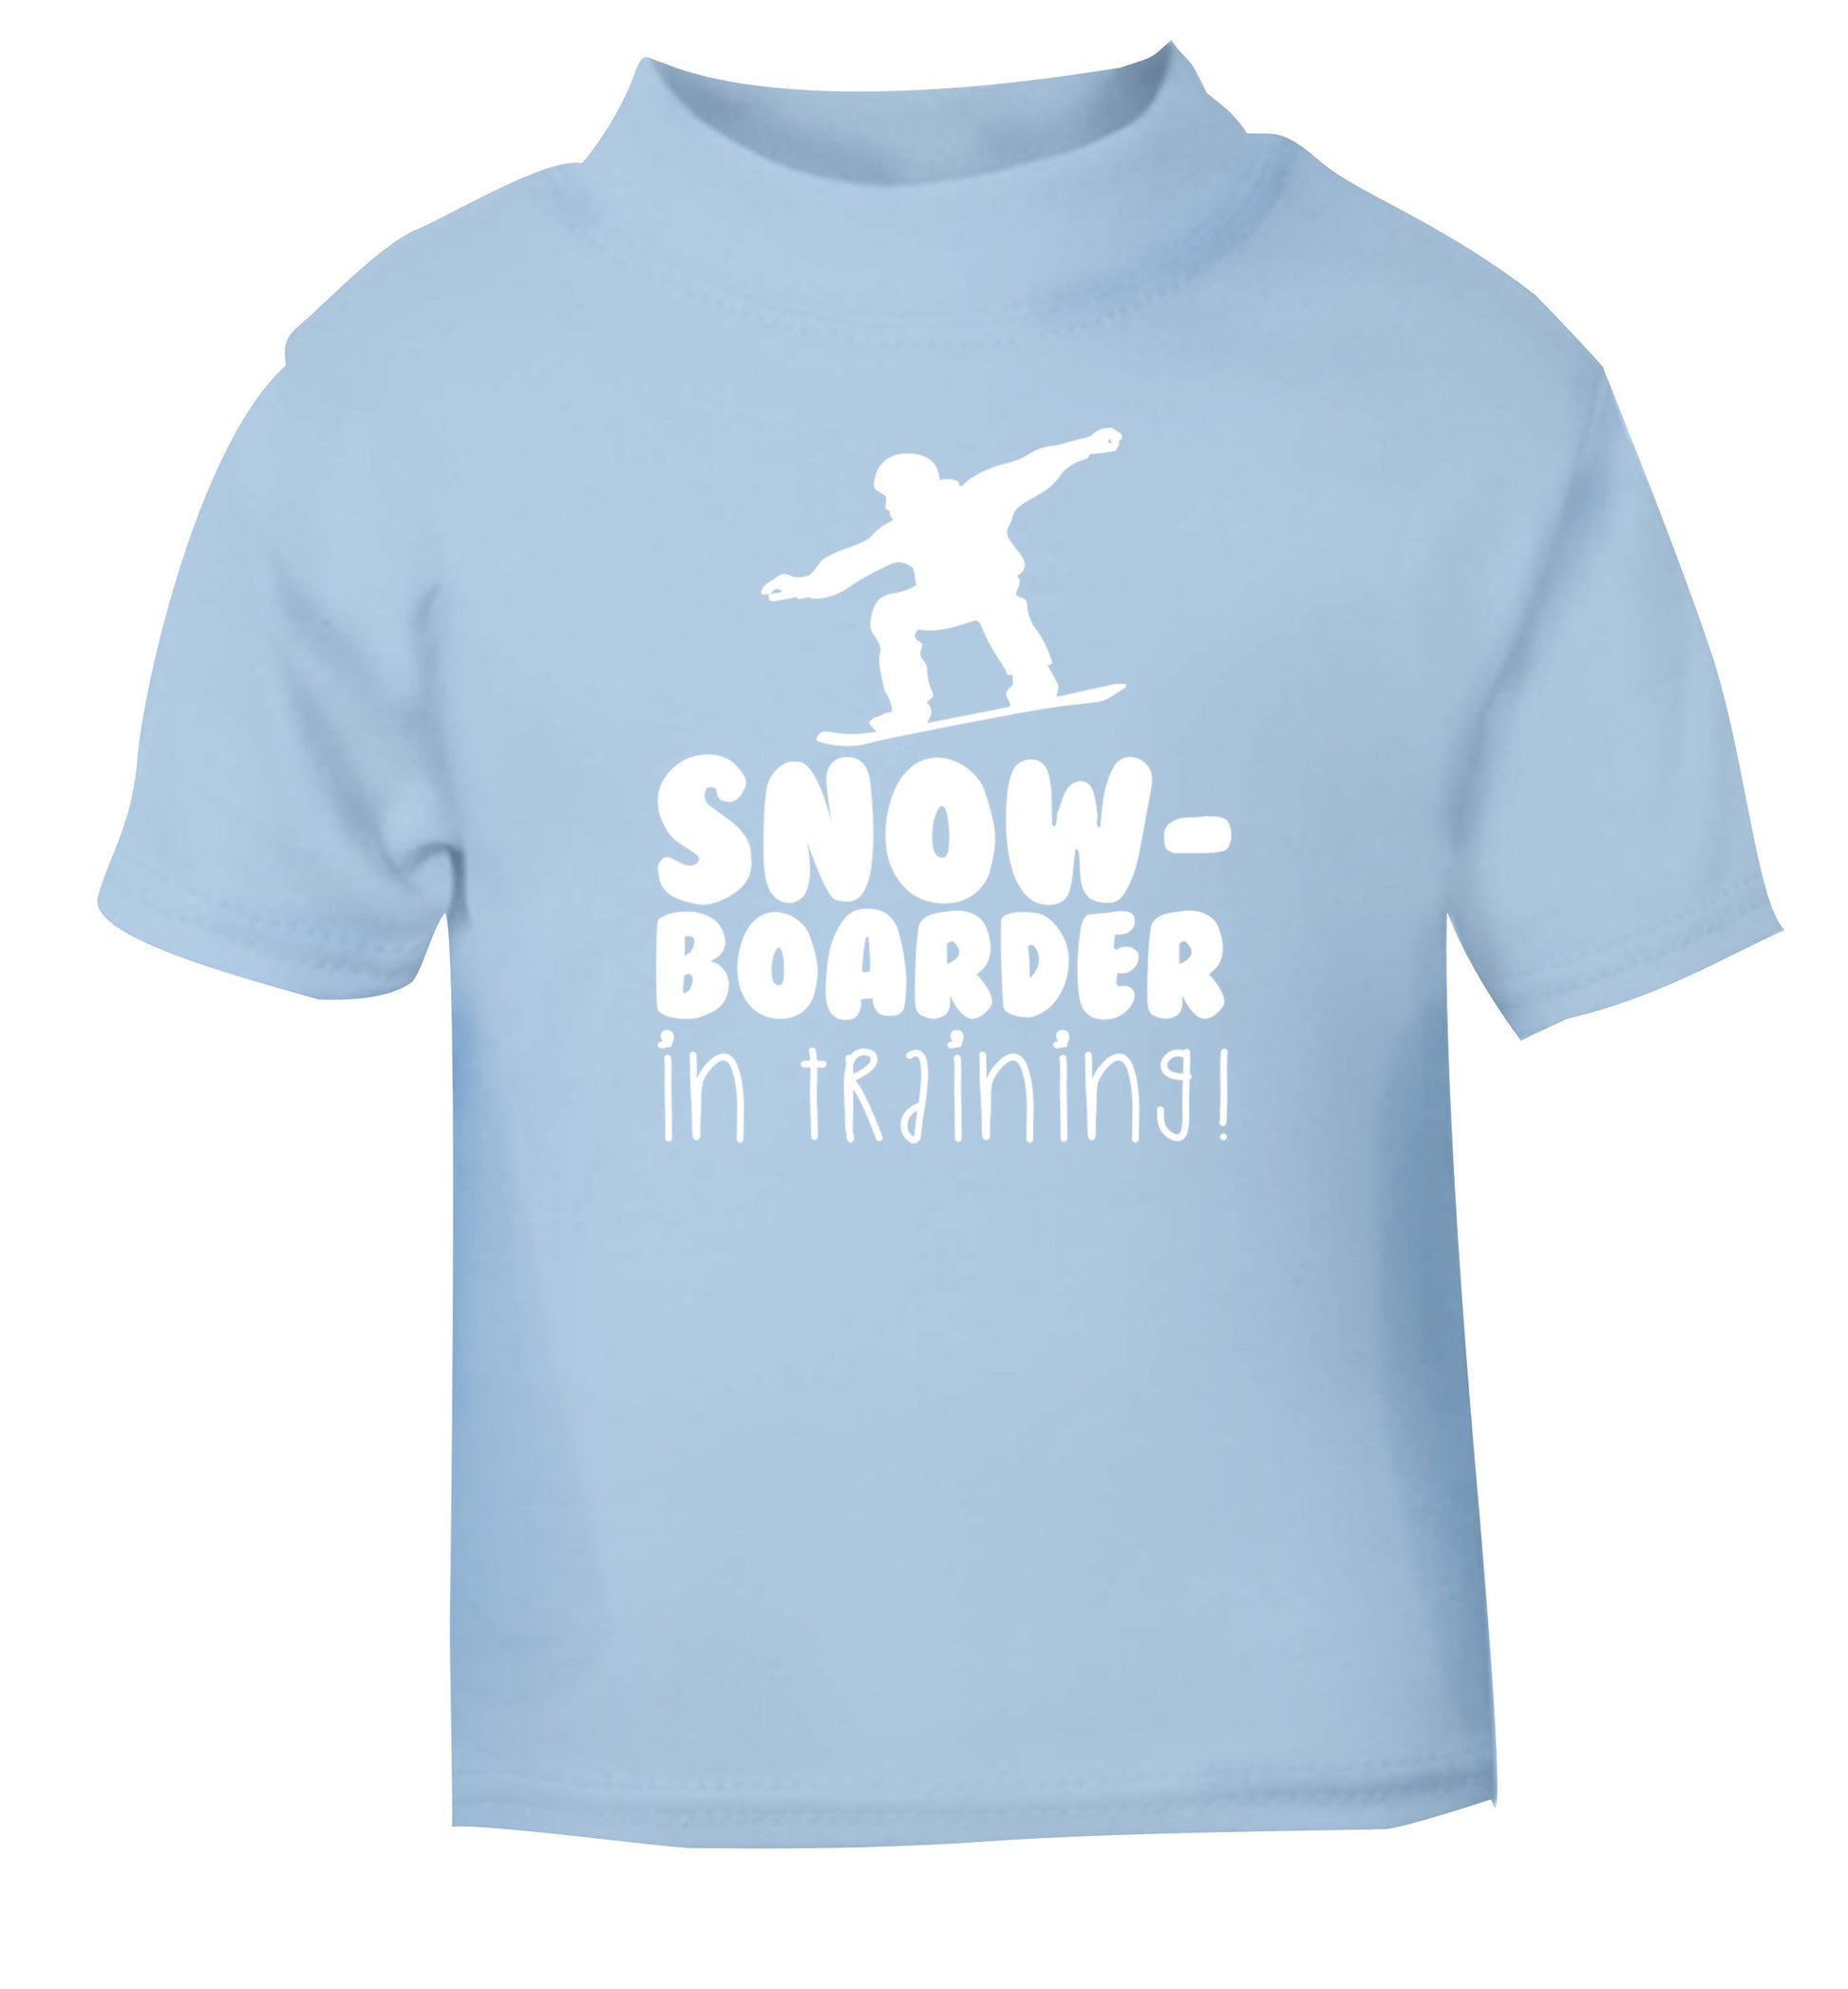 Snowboarder in training light blue Baby Toddler Tshirt 2 Years